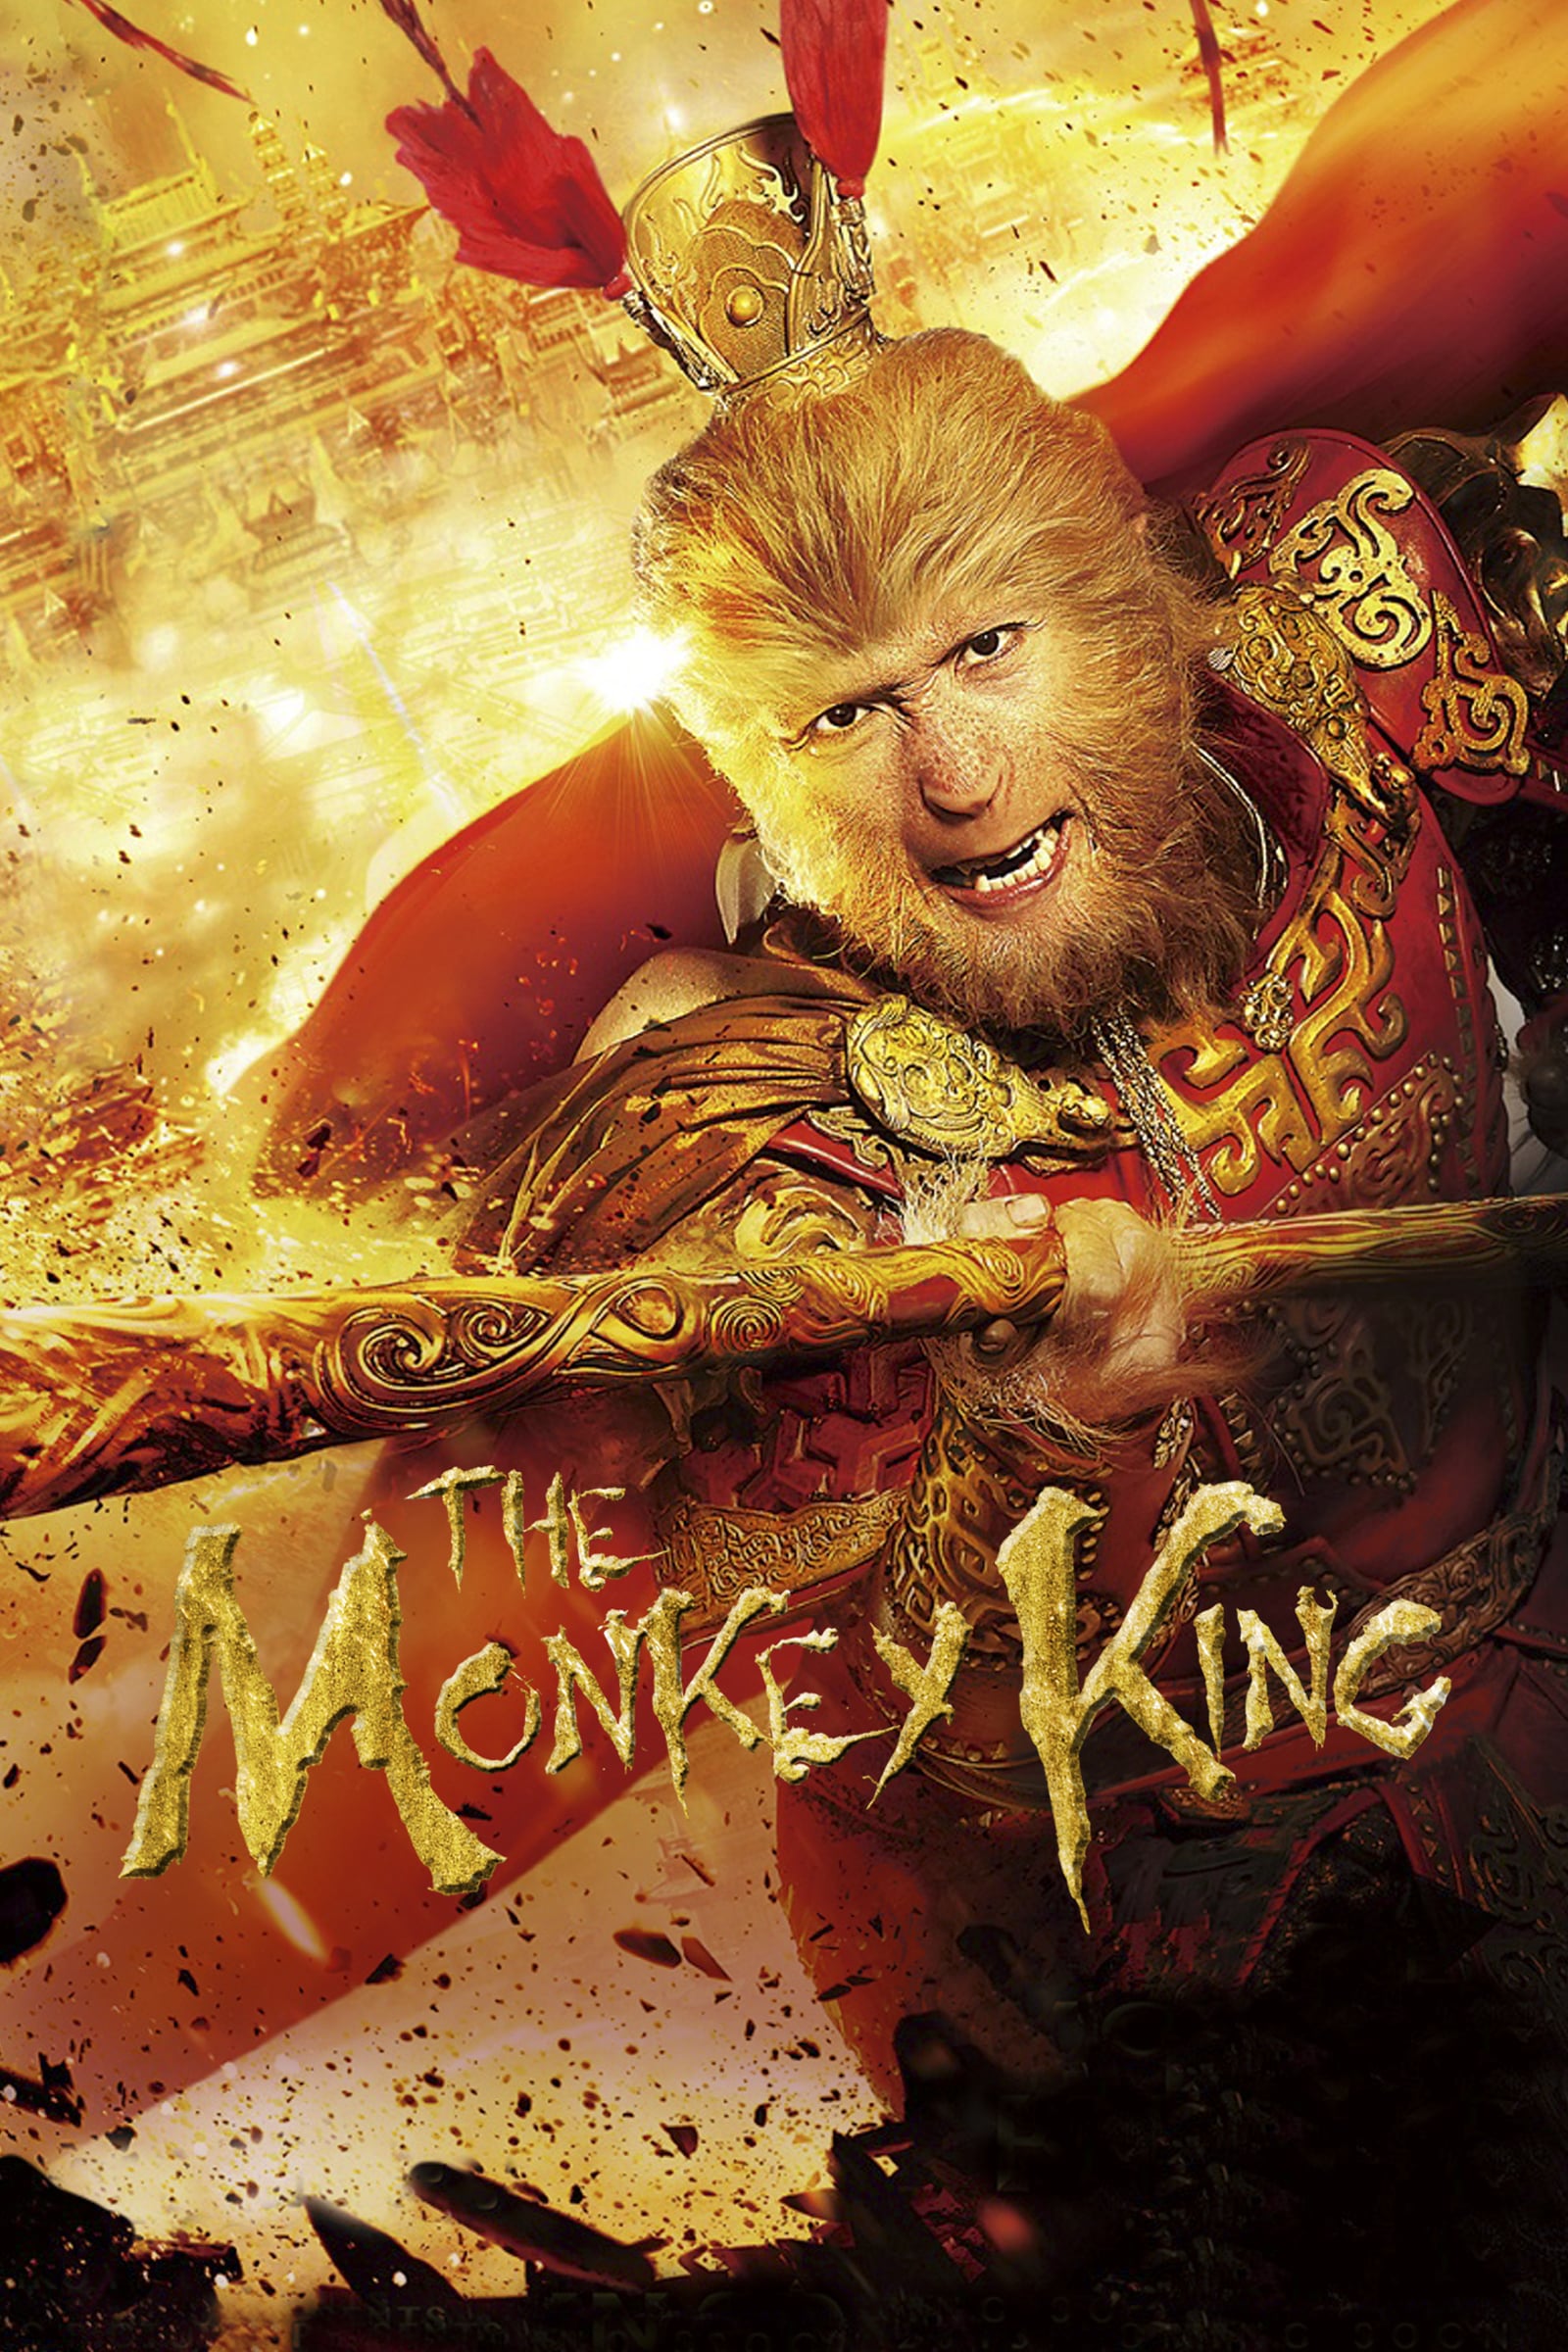 the monkey king 2014 quotes